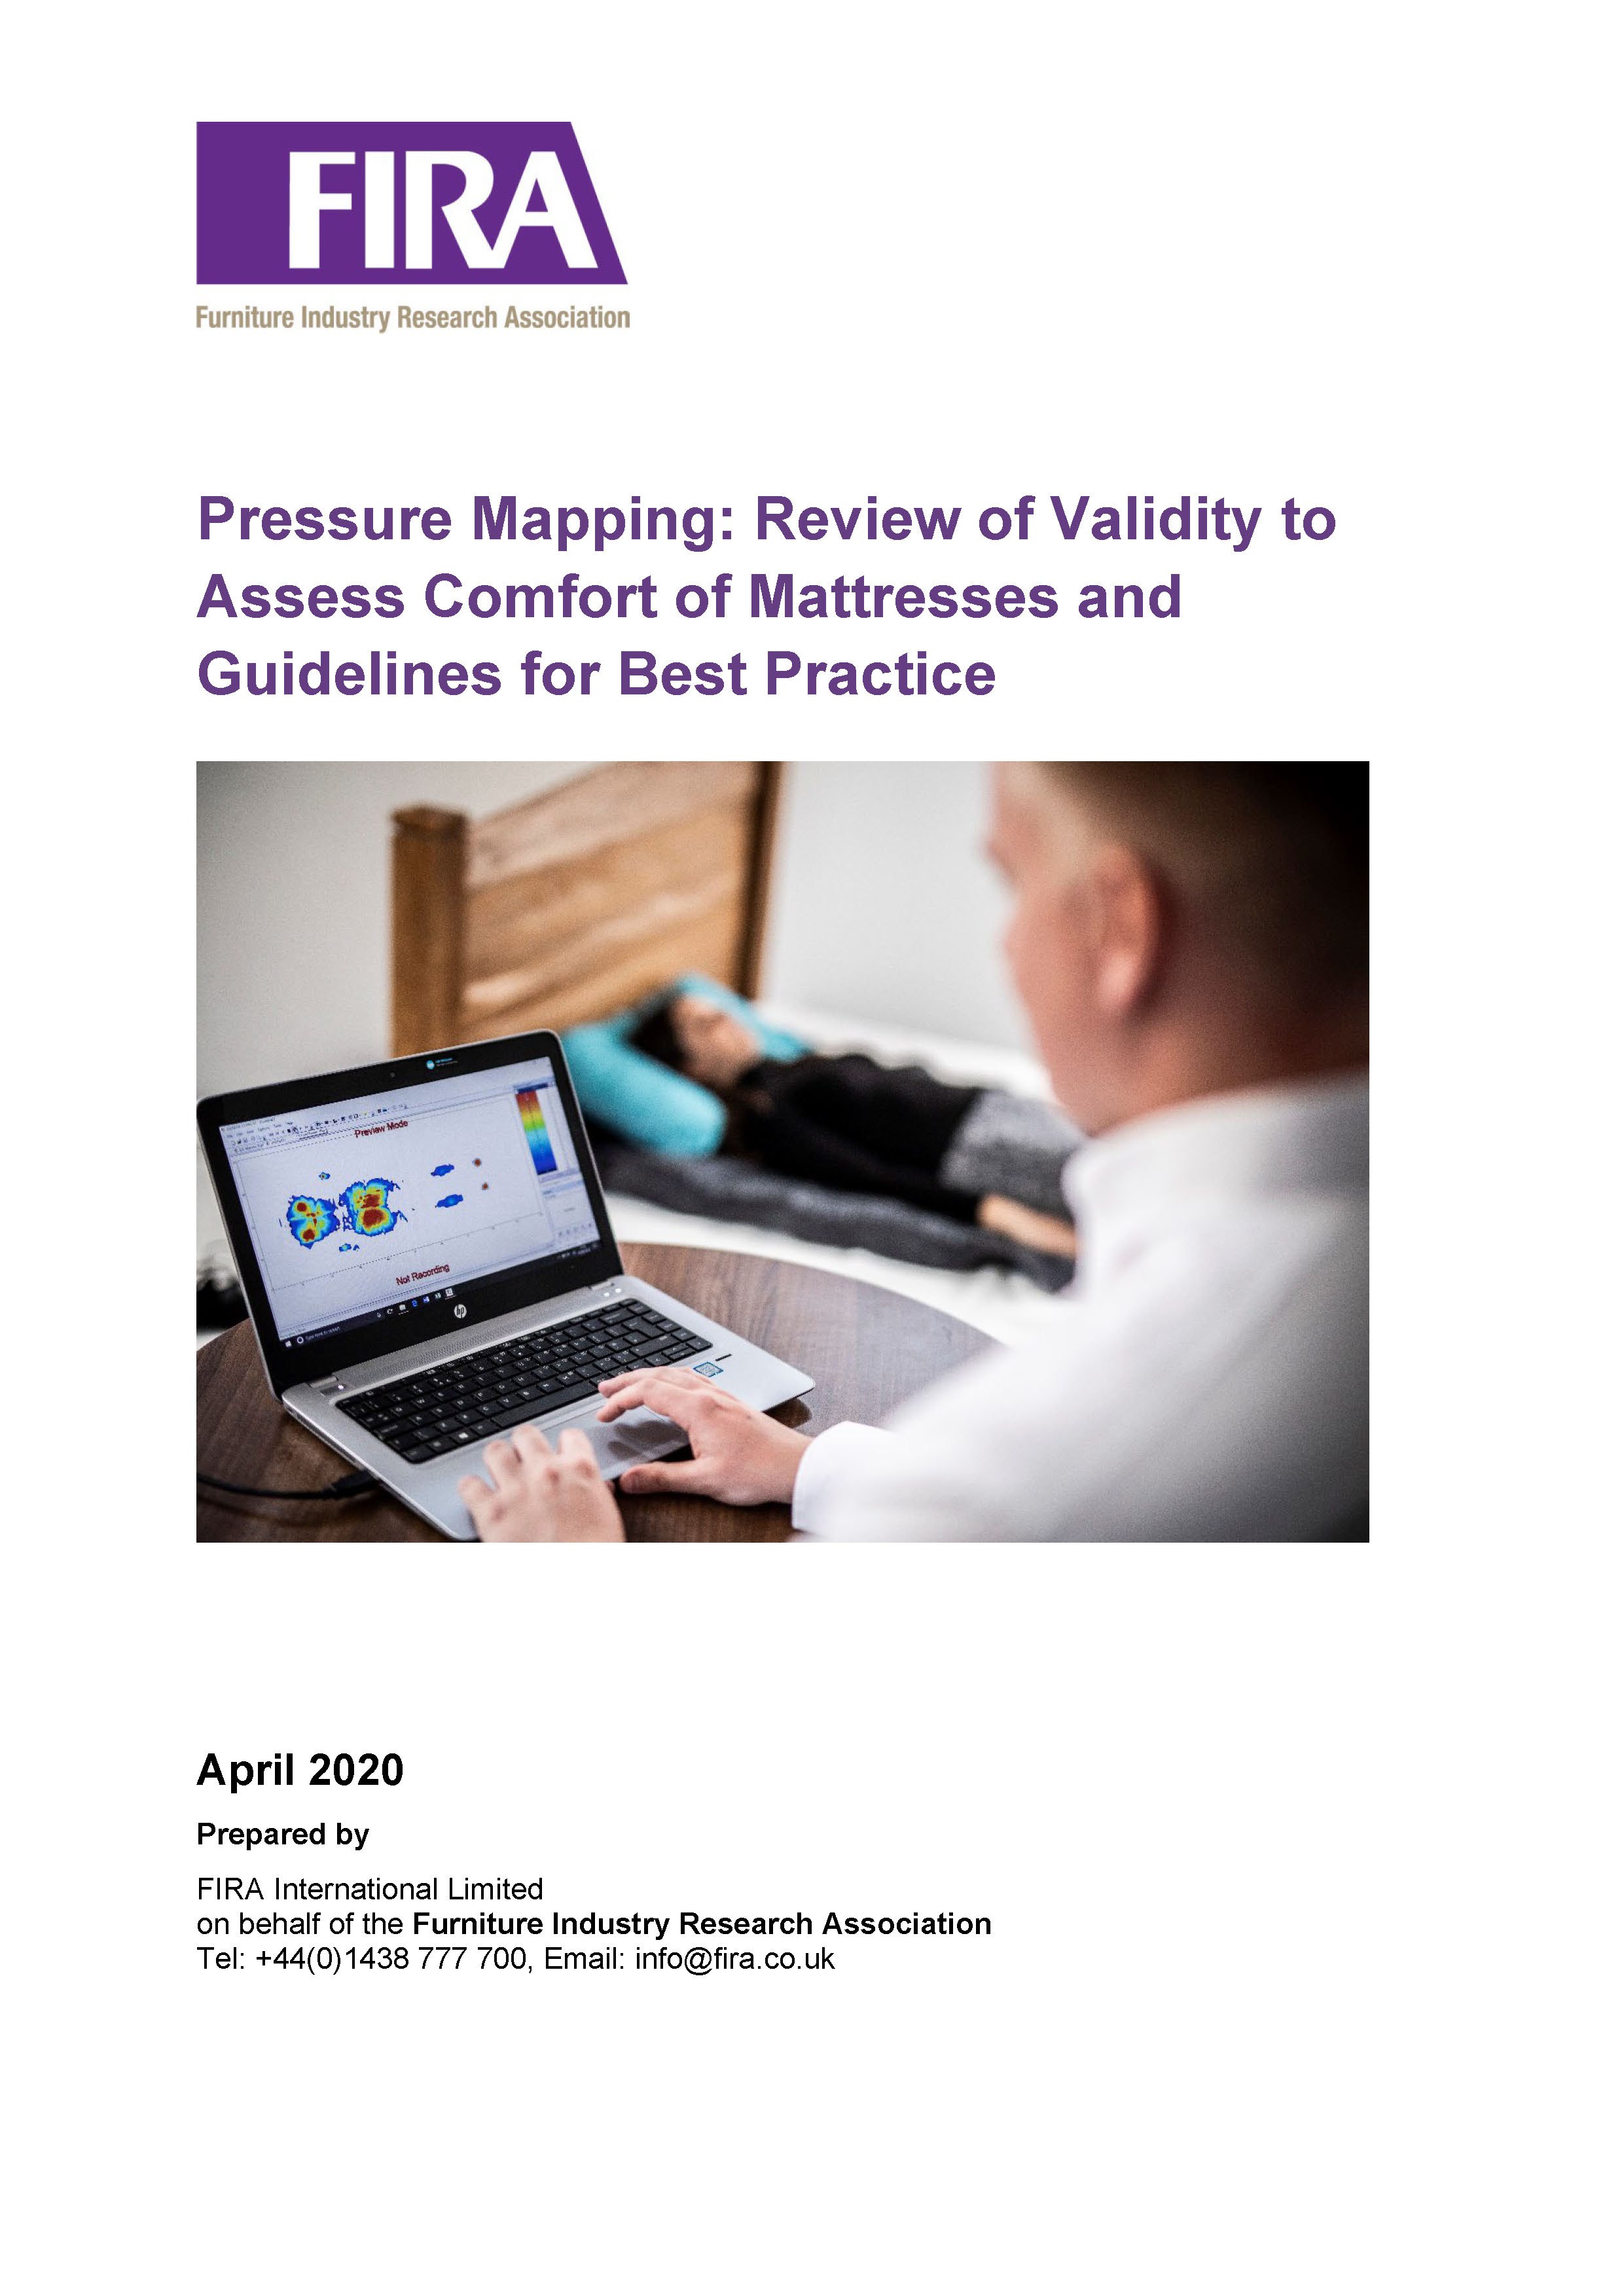 Pressure Mapping: Review of Validity to Assess Comfort of Mattresses - Guidelines for Best Practice